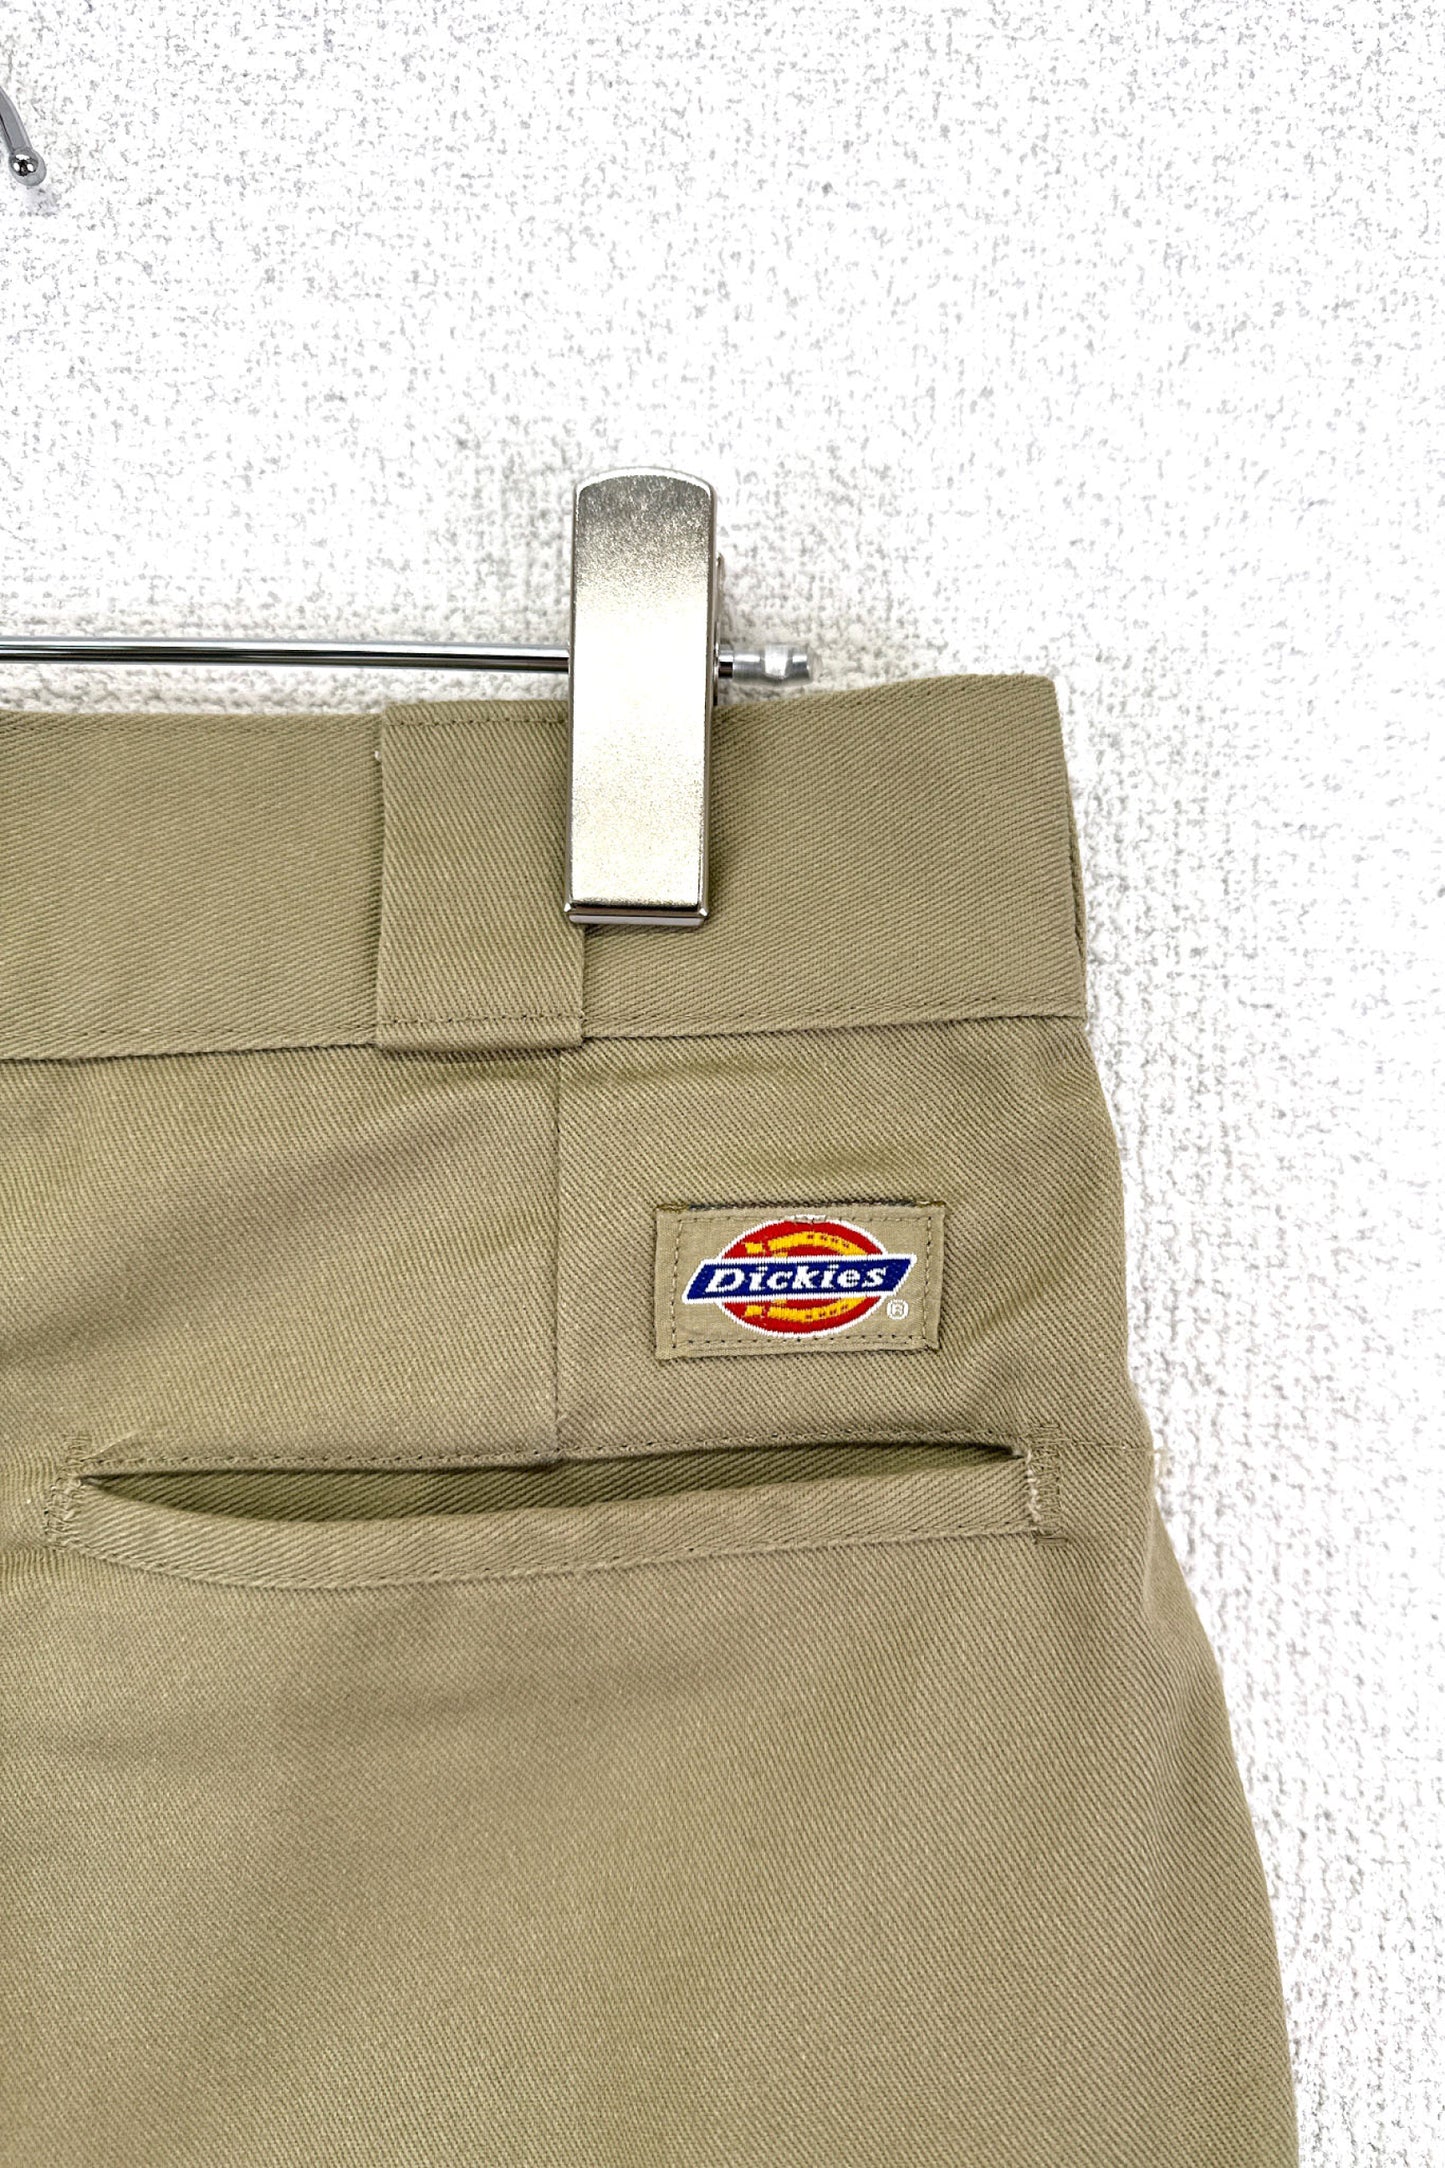 90's Made in USA Dickies work pants